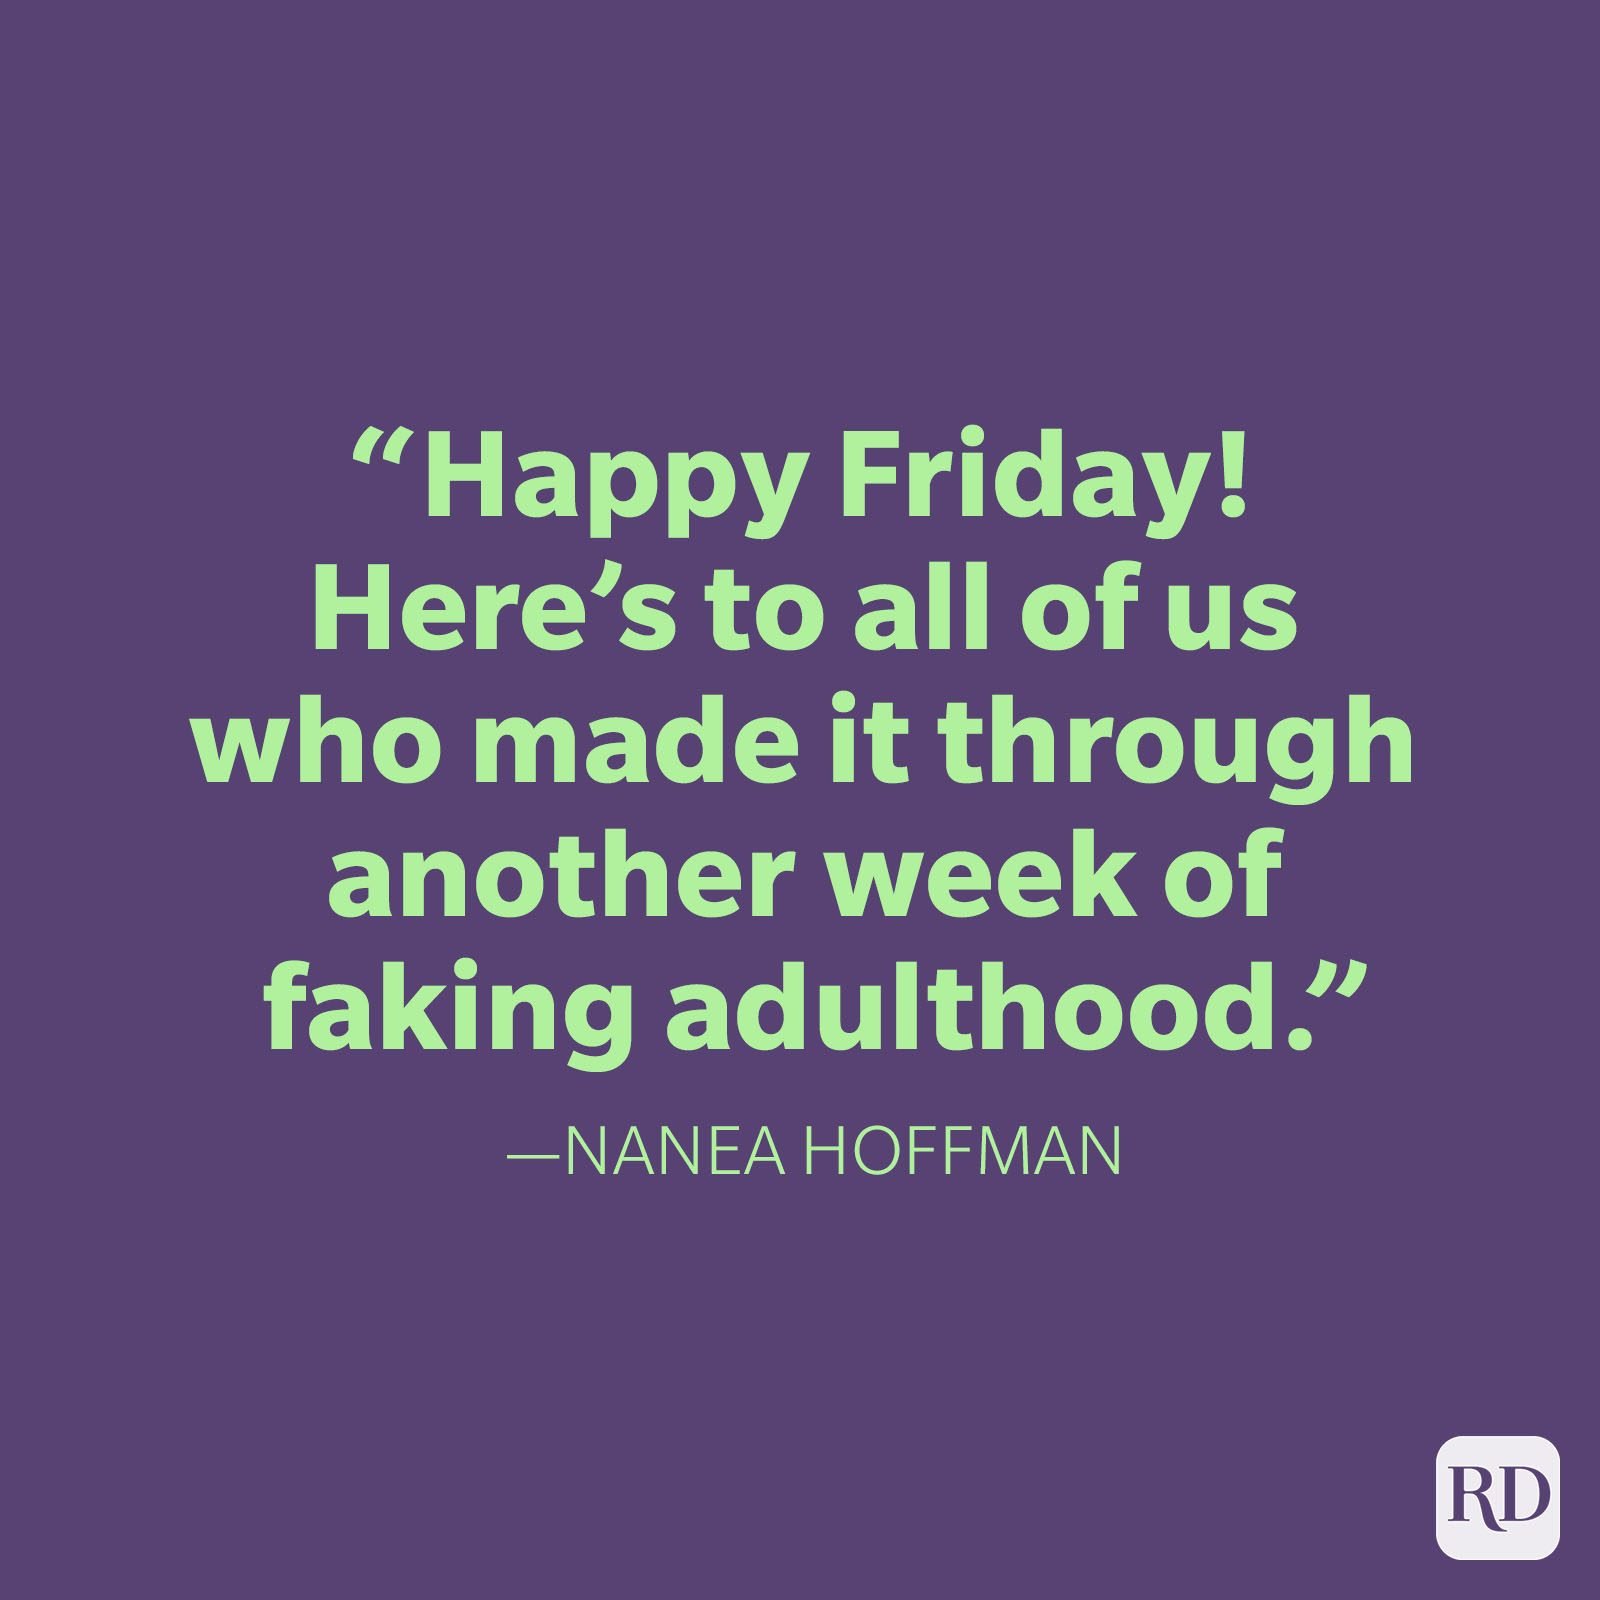 50 Best Friday Quotes to Welcome in the Weekend | Reader's Digest